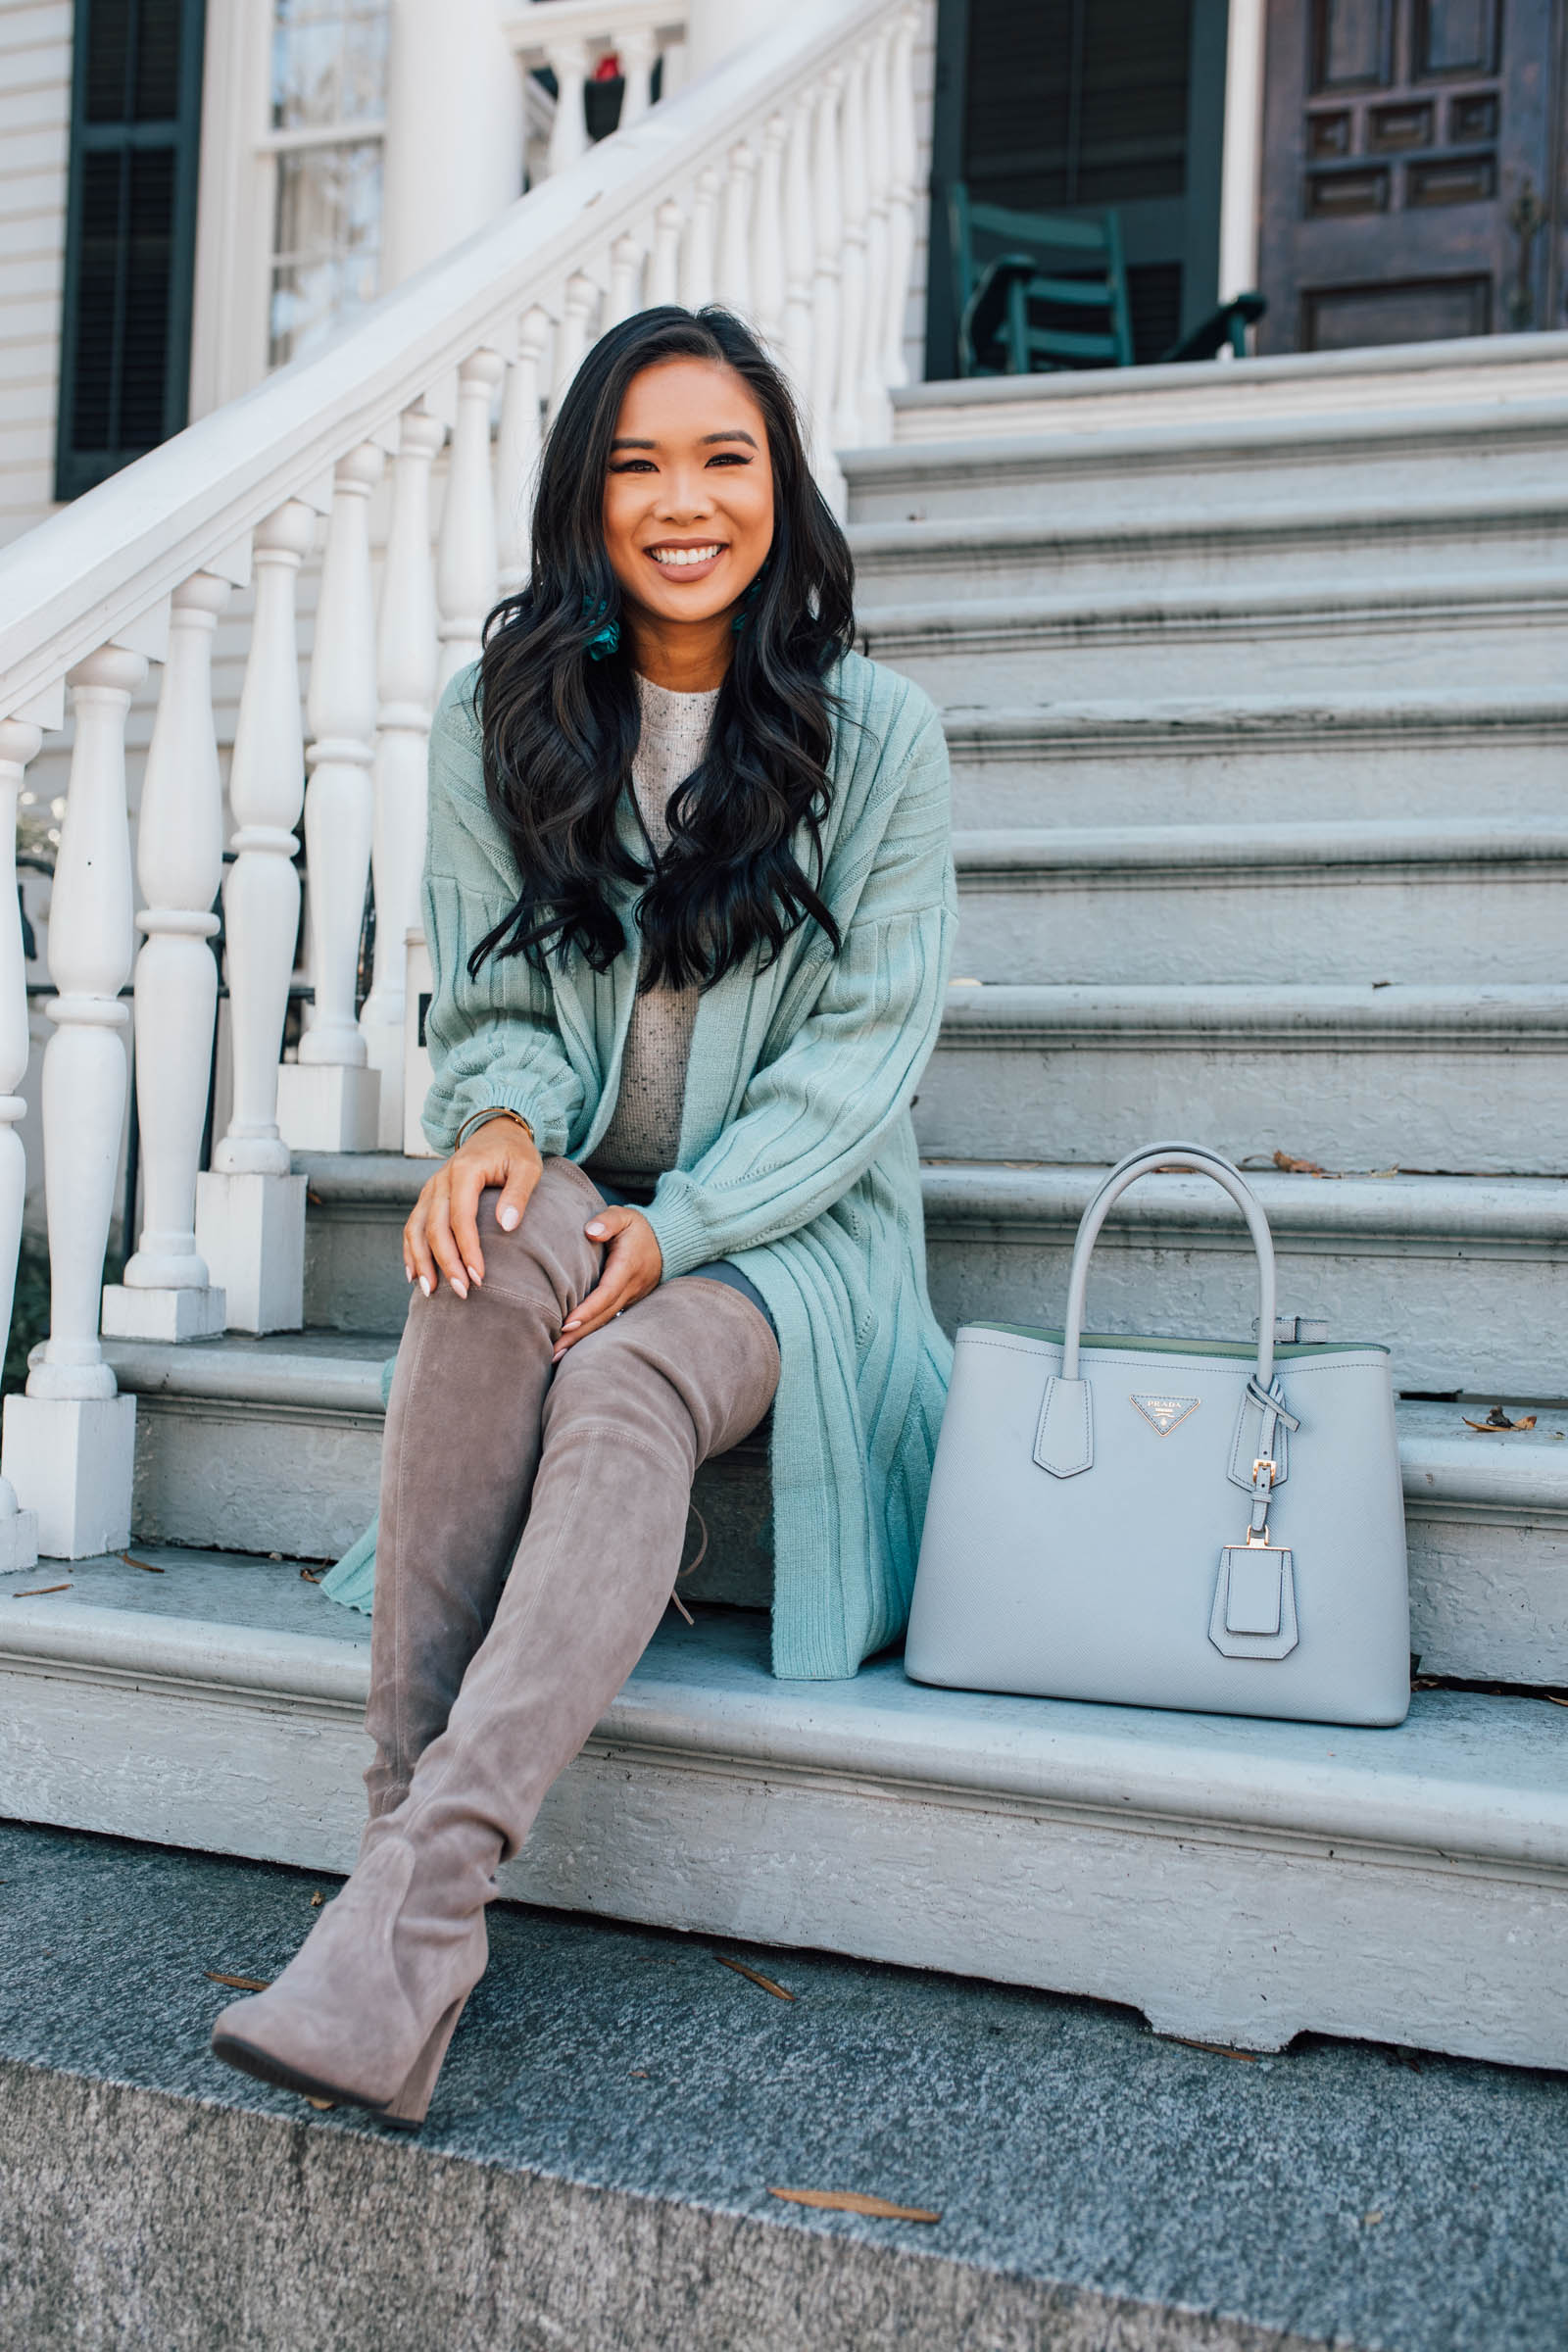 Blogger Hoang-Kim wears a mint green cardigan and over-the-knee boots for a fall ottd